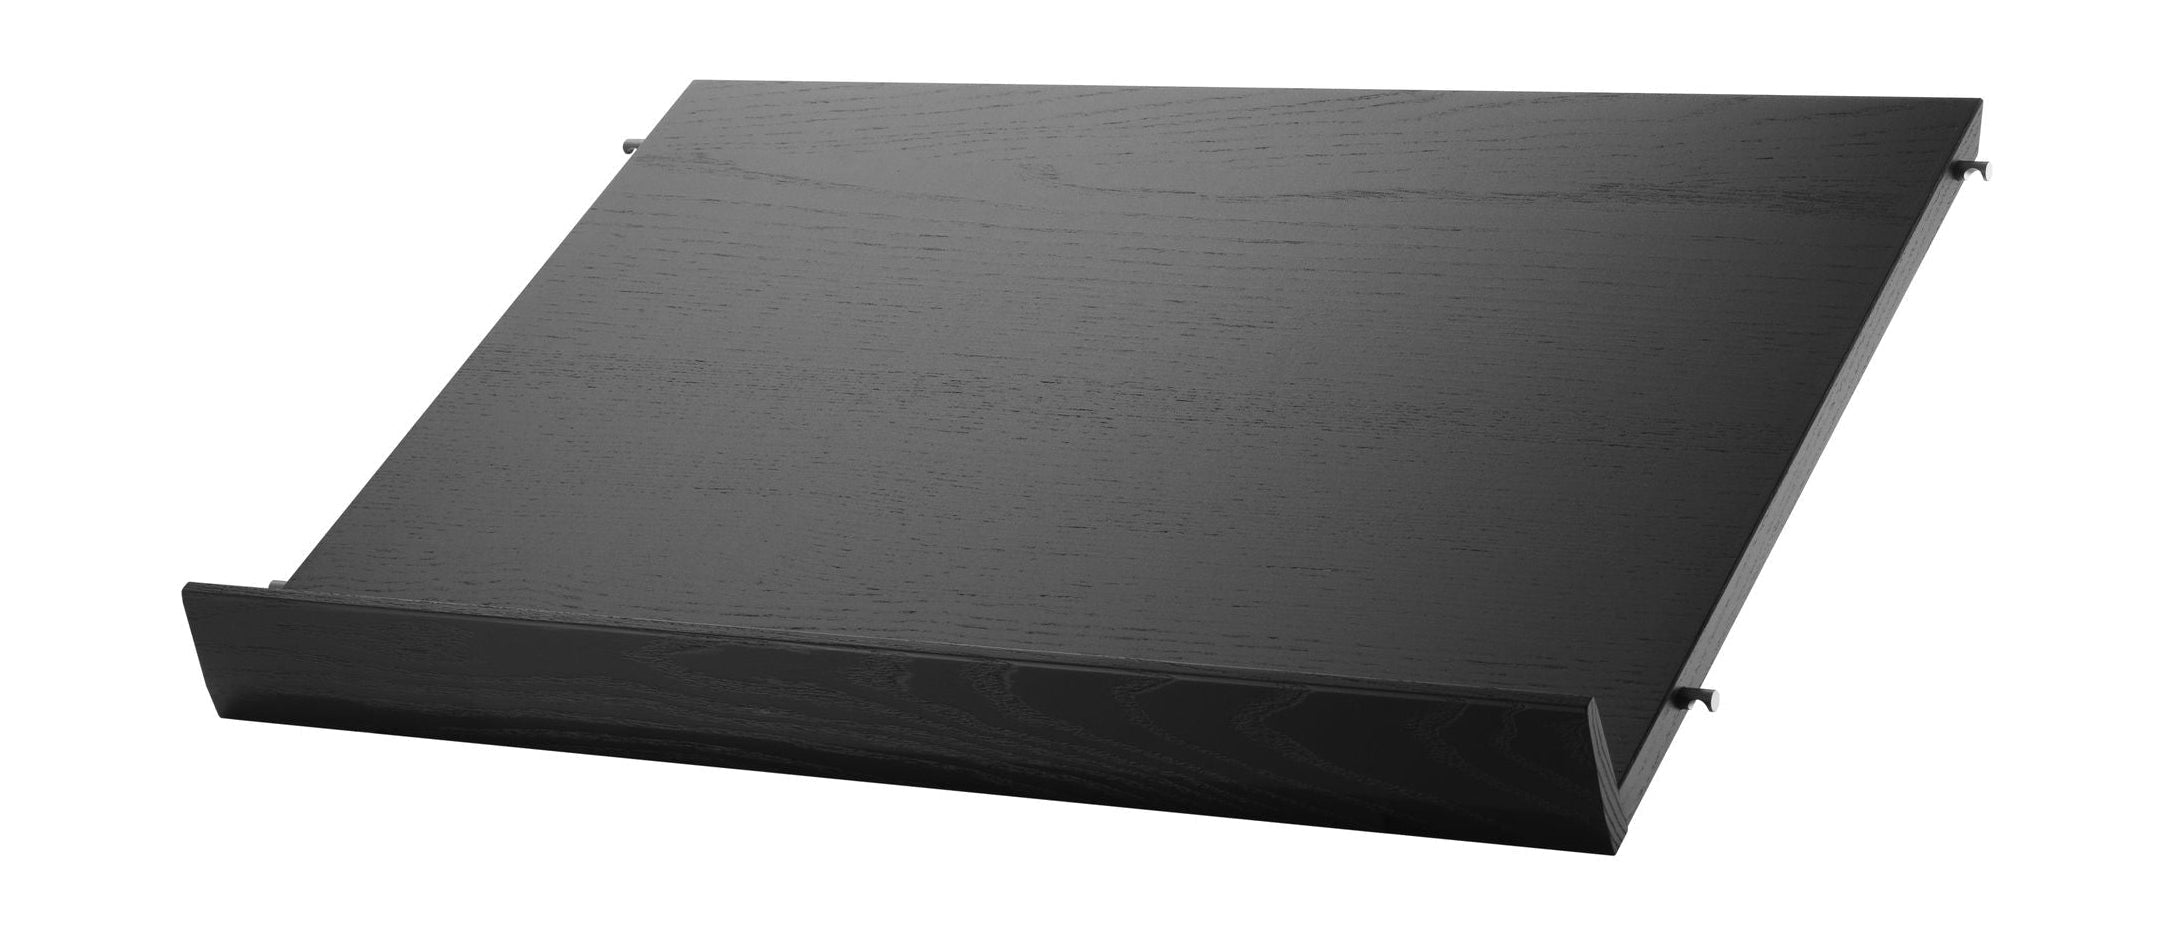 Strengmøbler Strengsystem Magasin Tray Wood Black Stained Ash, 30x58 cm